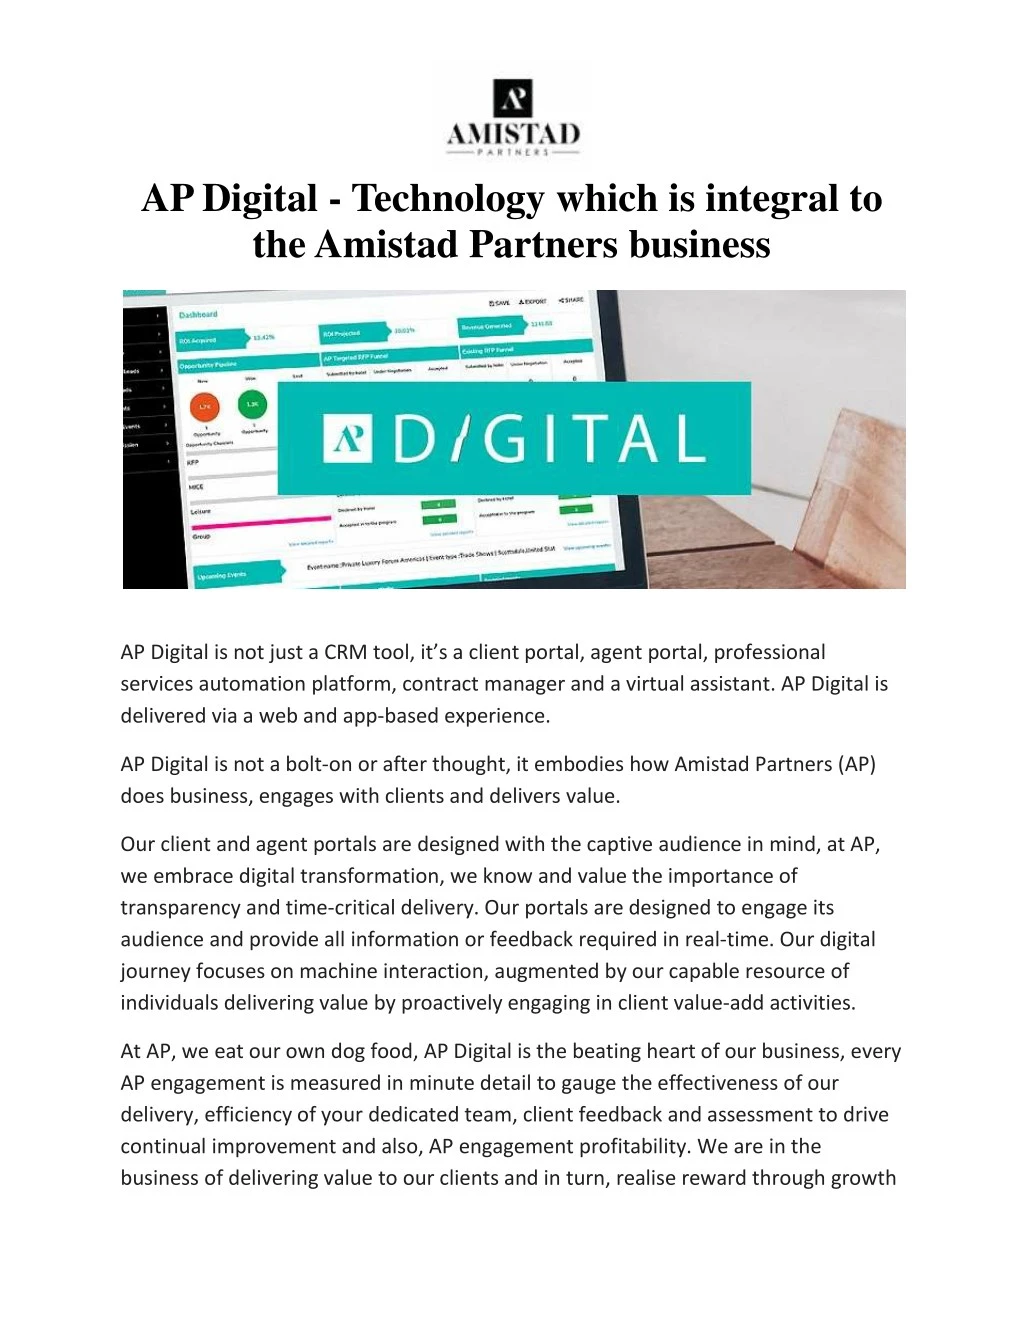 ap digital technology which is integral